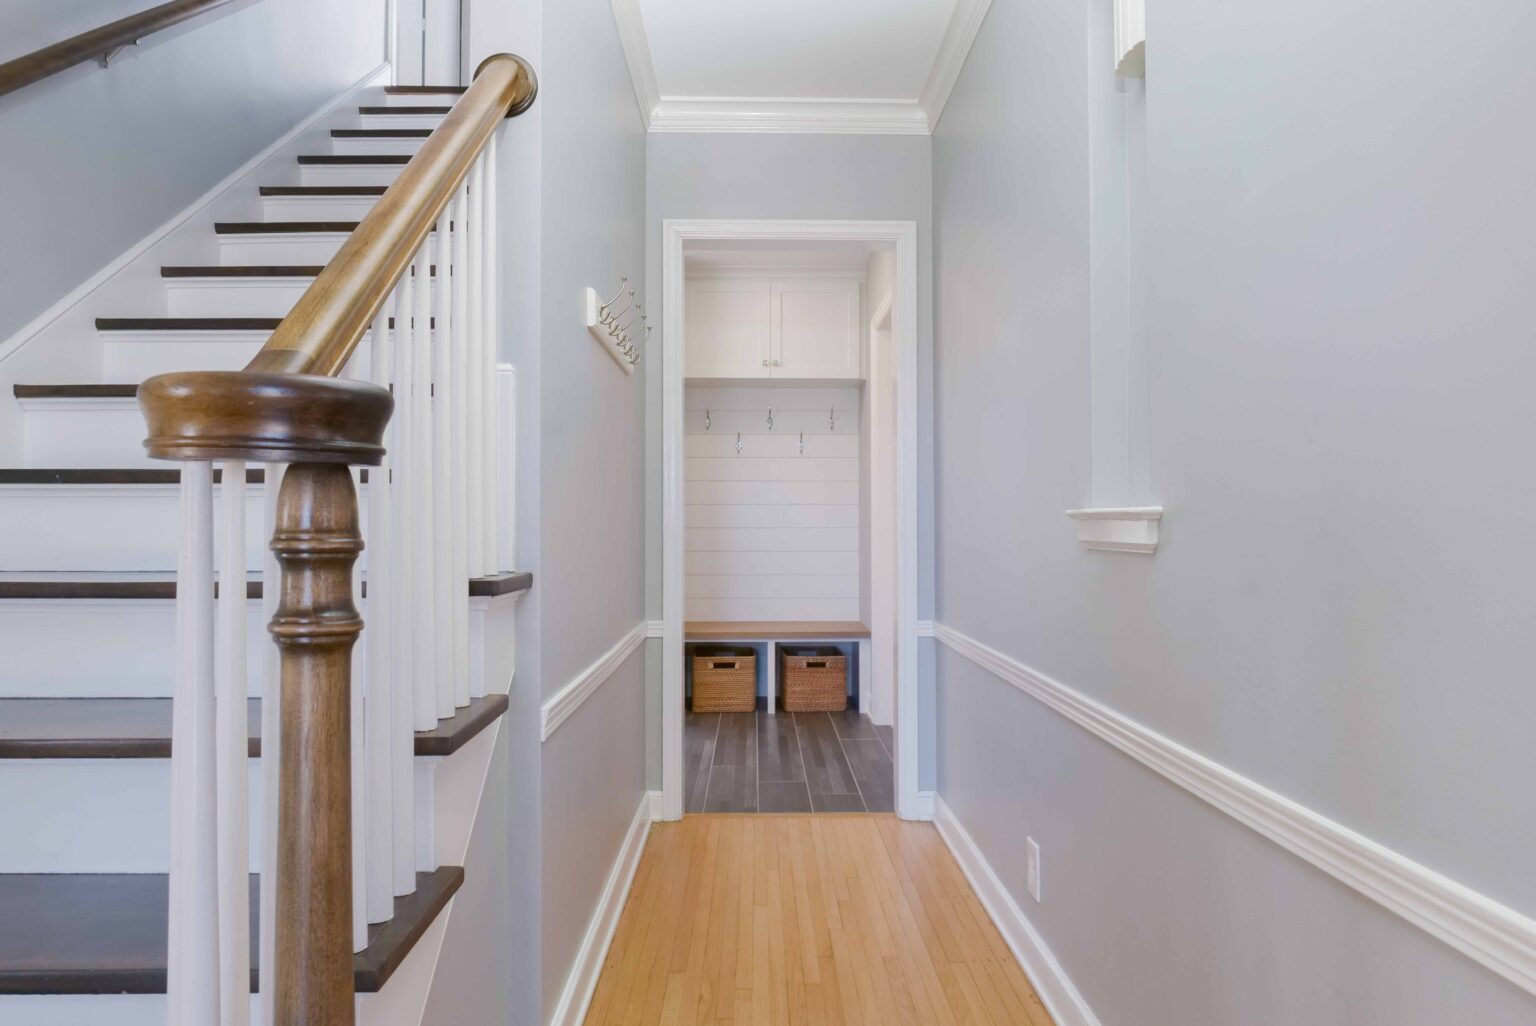 A hallway with wooden flooring leads to a room with hooks and baskets. A staircase with a wooden banister is on the left. Walls are light grey with white trim, showcasing the elegance of the Hampshire Drive remodel.